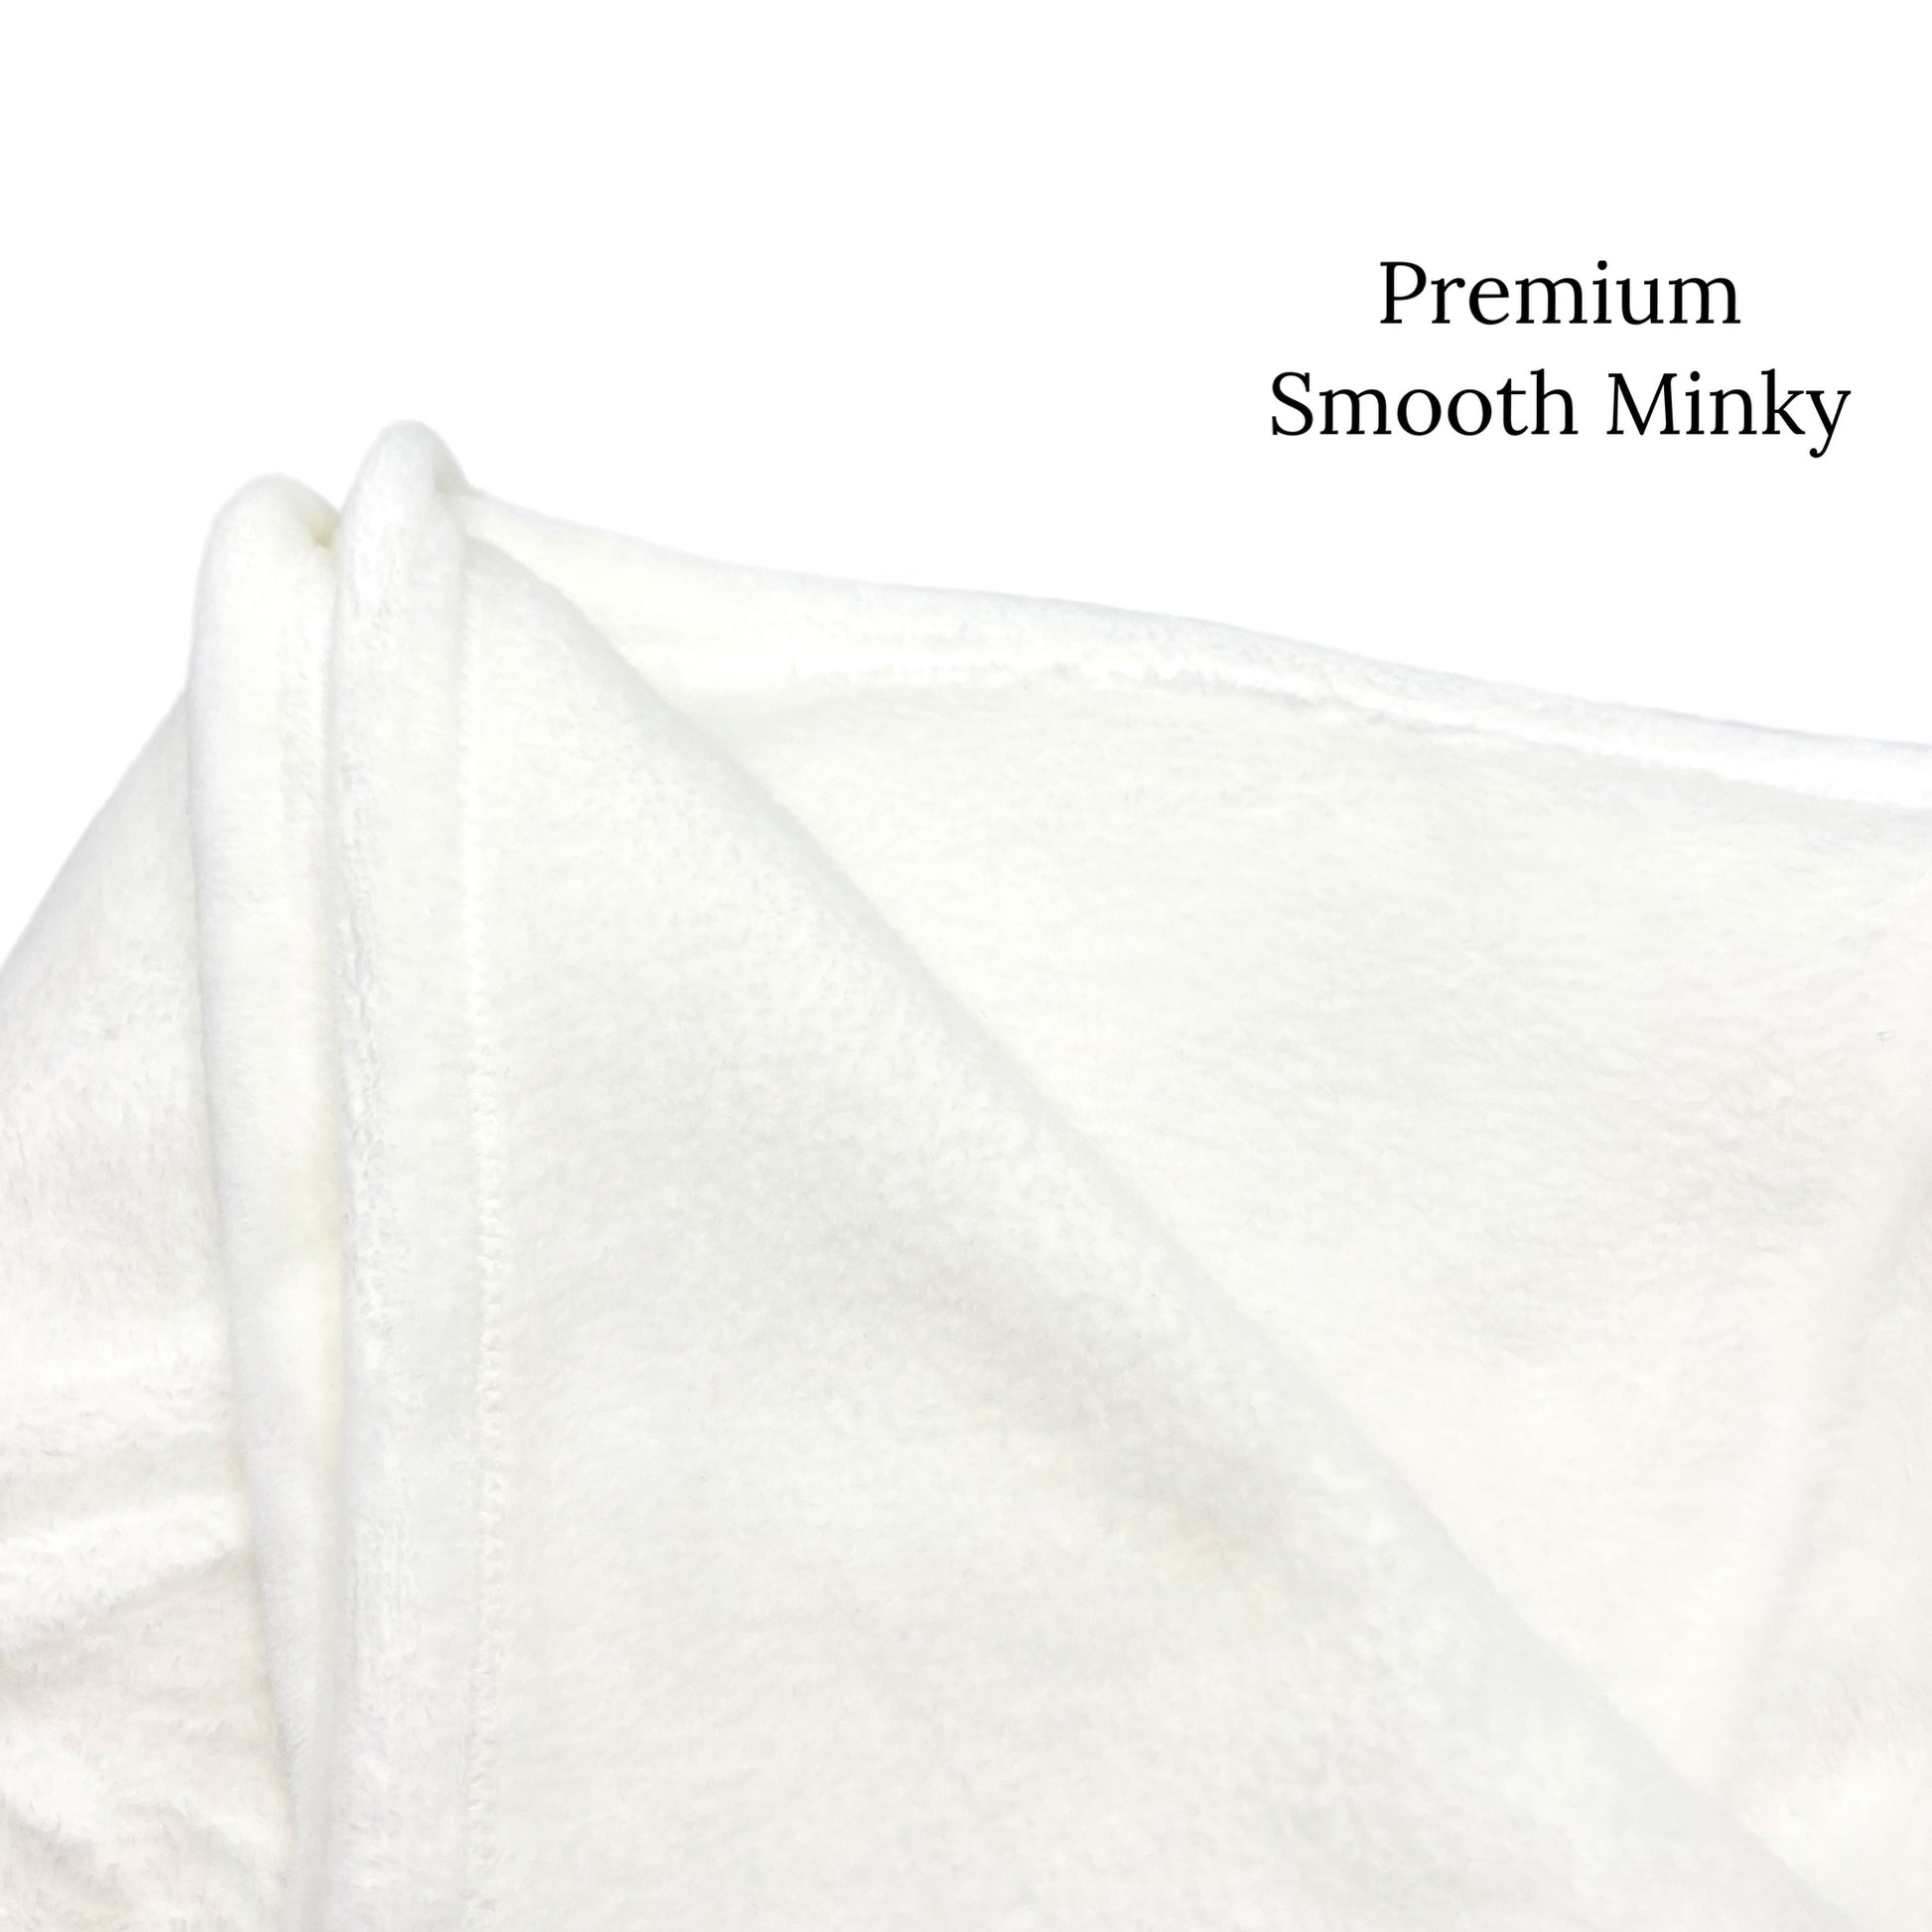 Folded smooth thick fuzzy blanket in base white color.